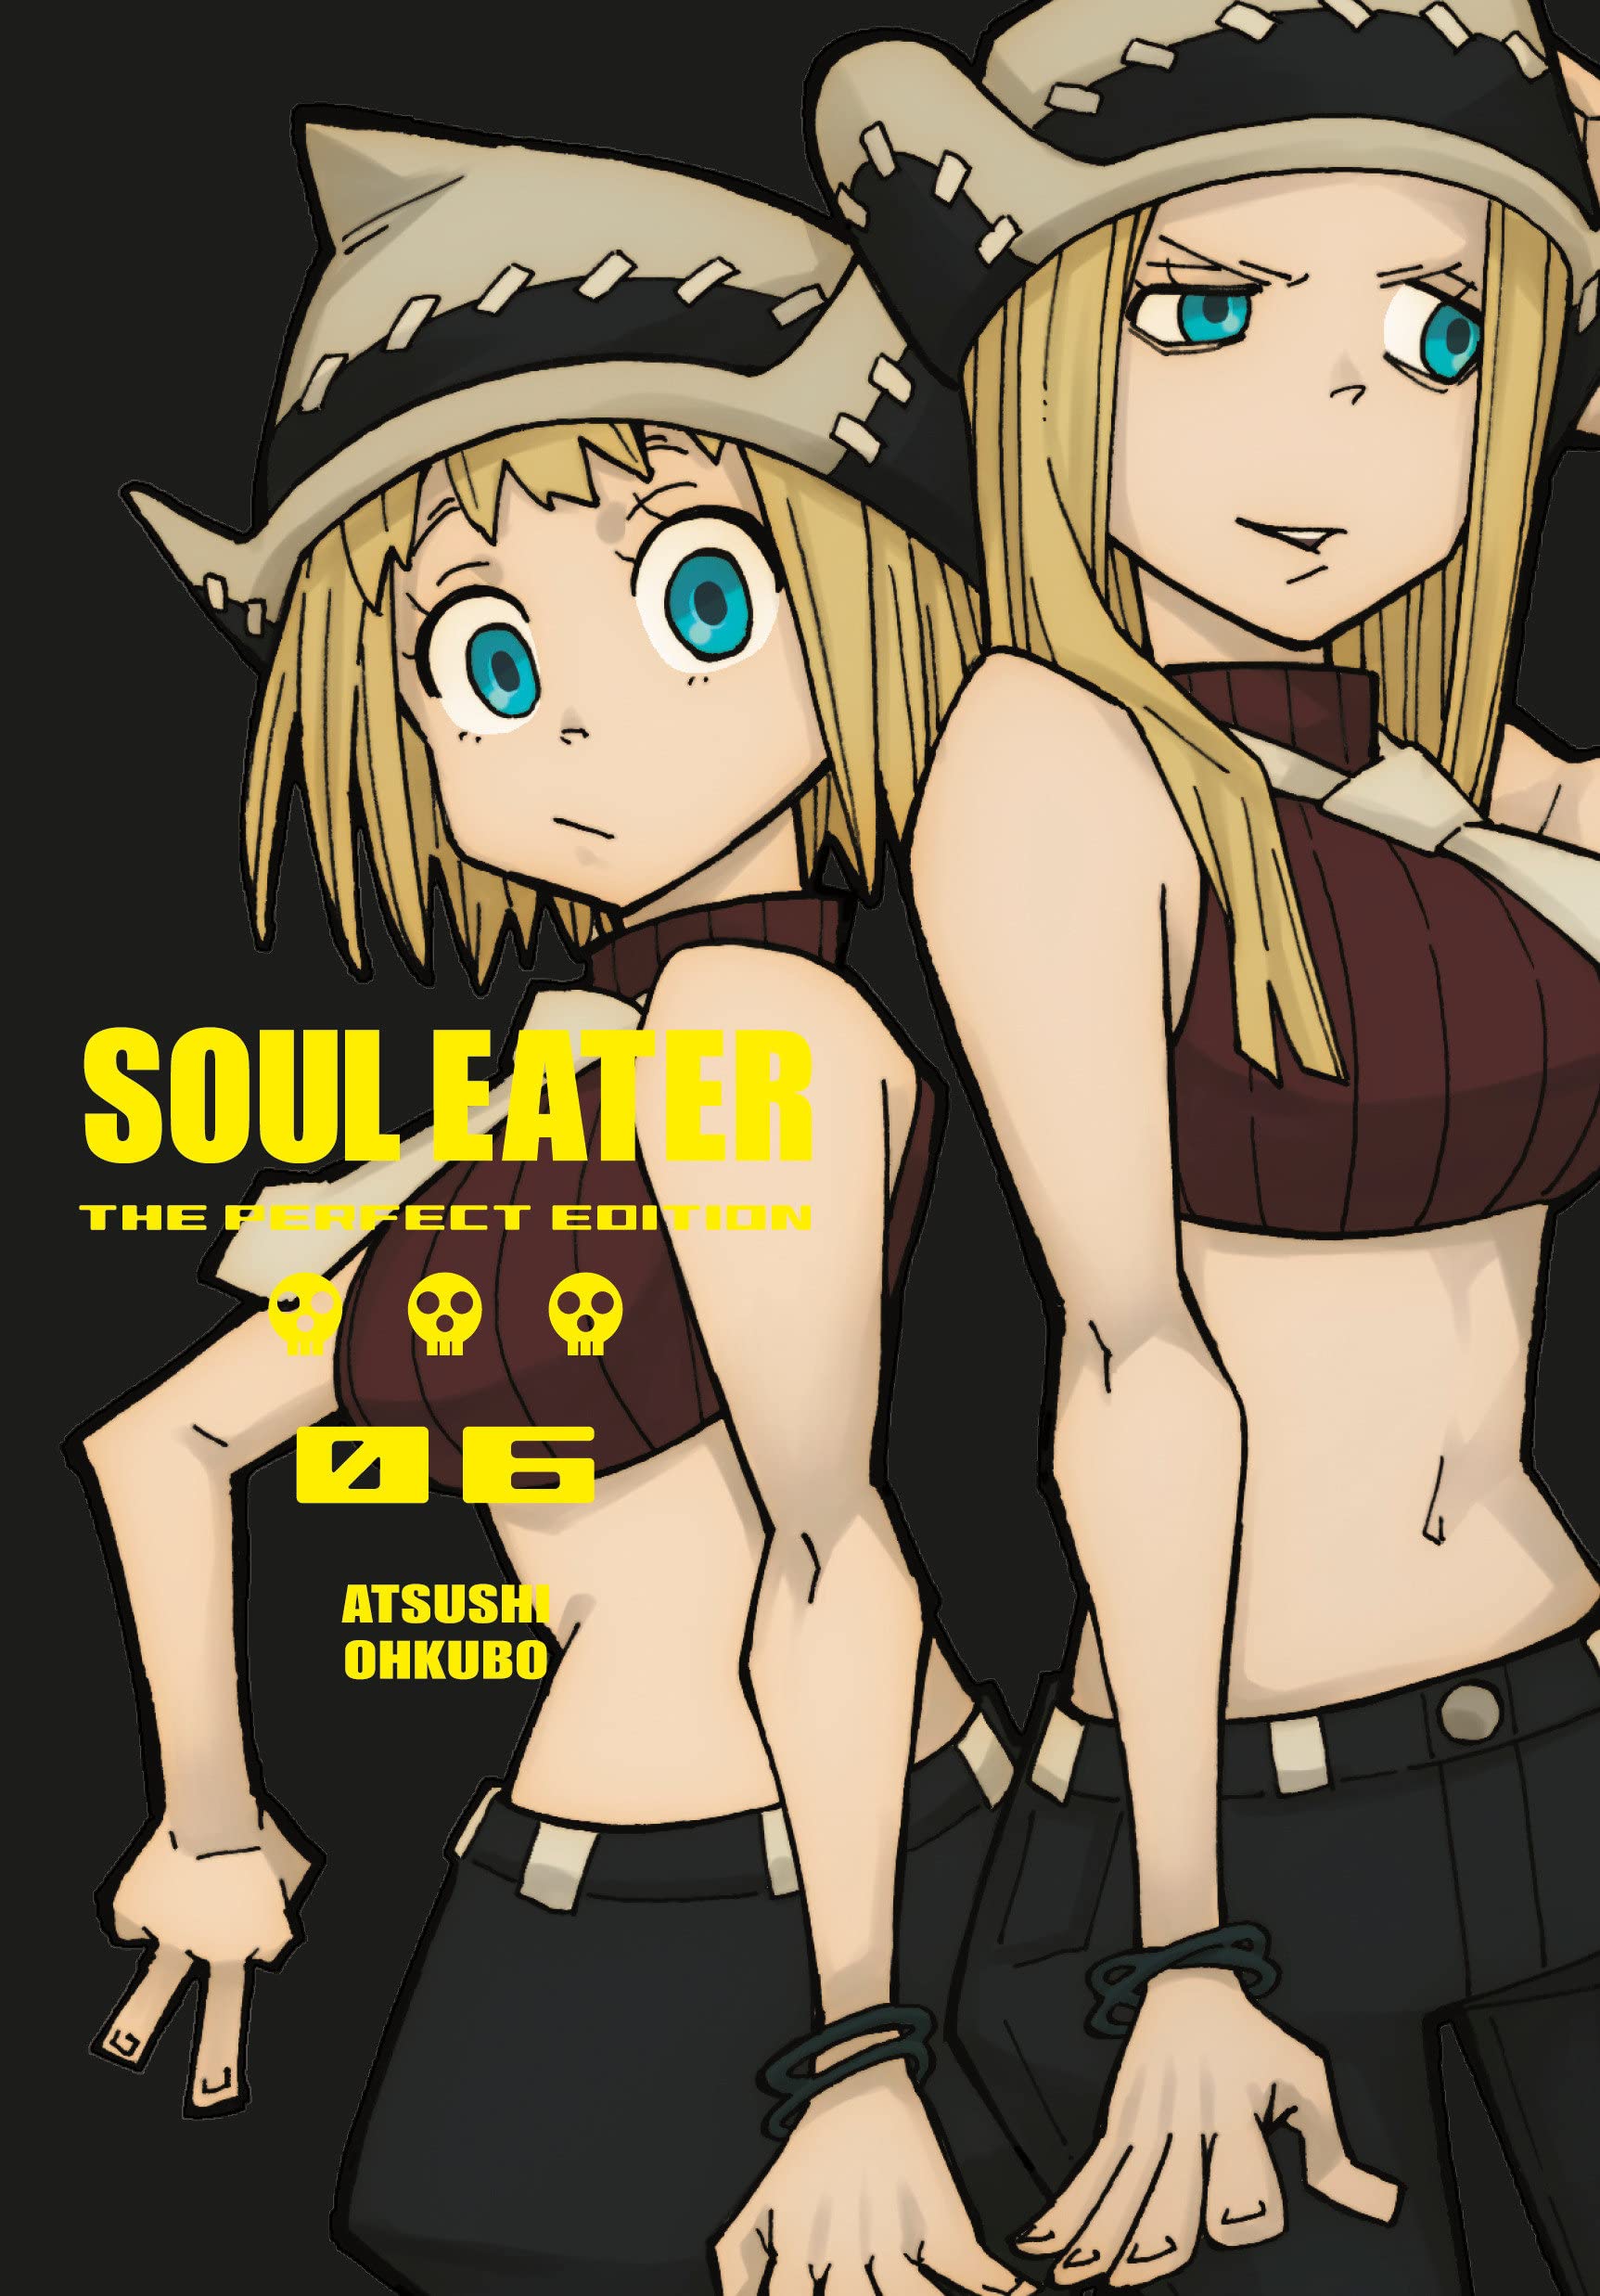 Soul Eater: The Perfect Edition - Volume 6